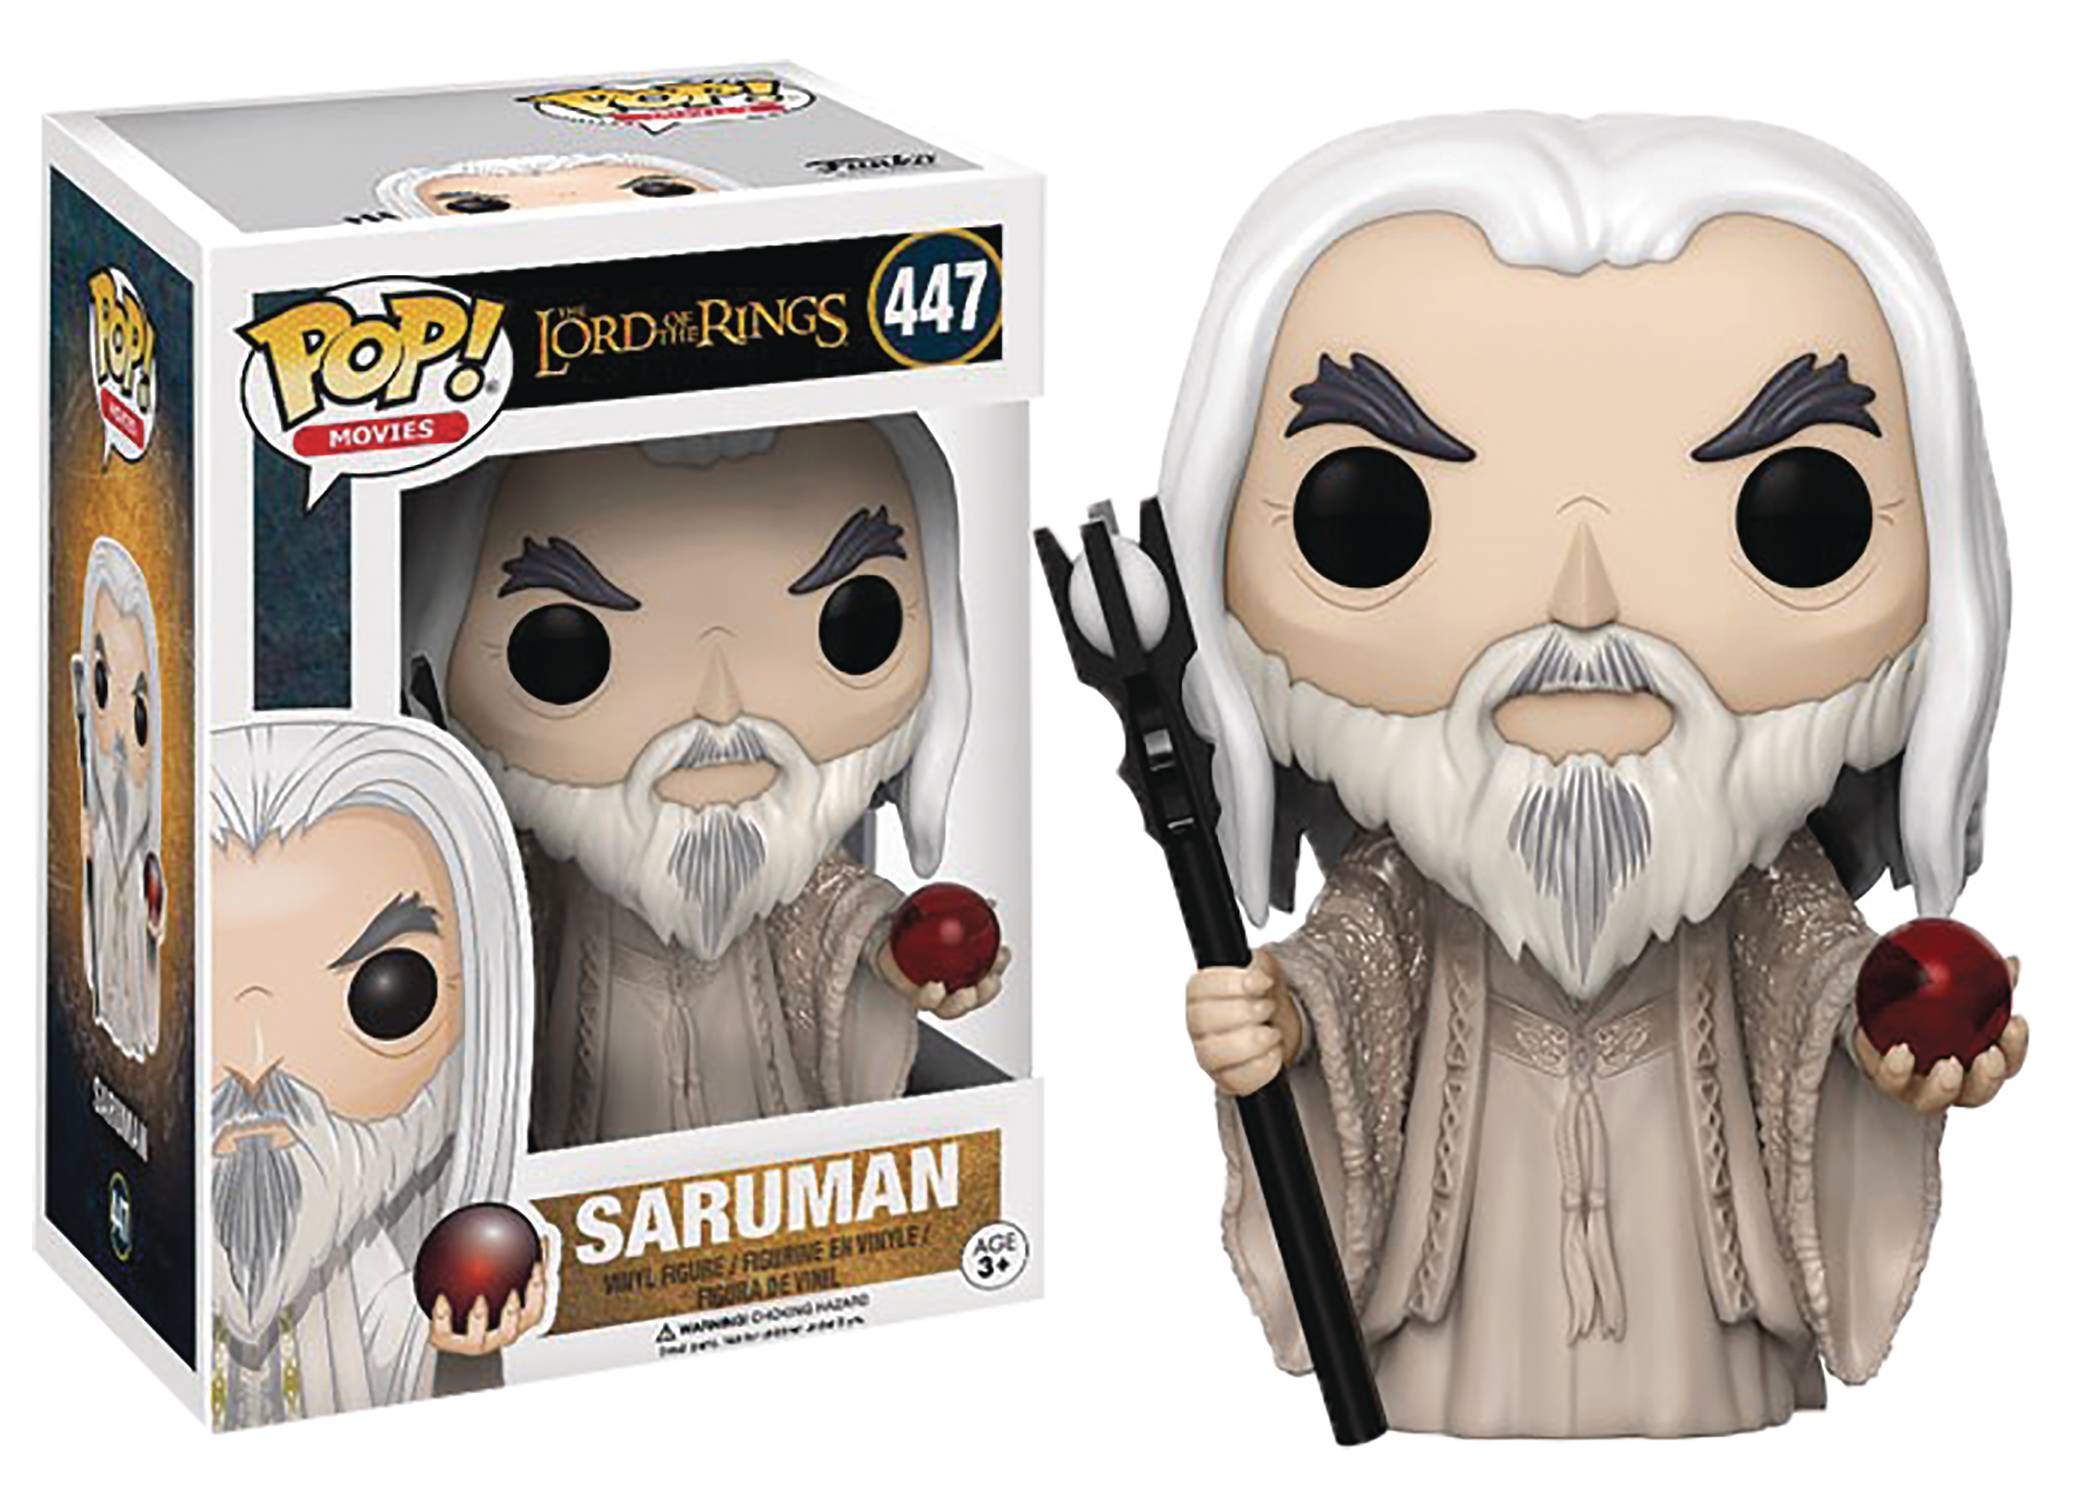 Saruman - Lord of the Rings by GalleryAB on DeviantArt